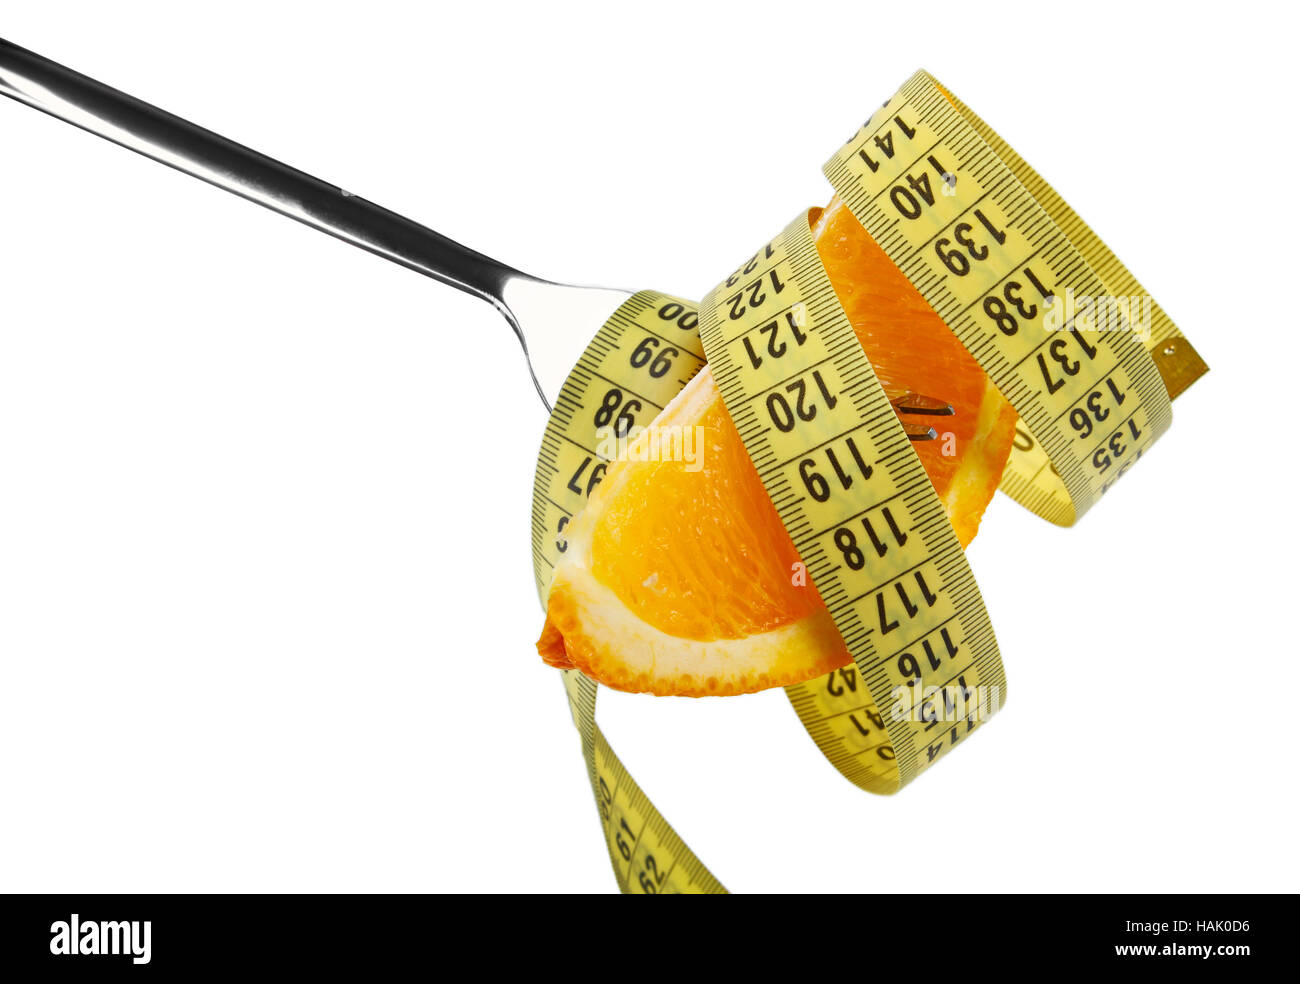 healthy nutrition, lose weight concept Stock Photo